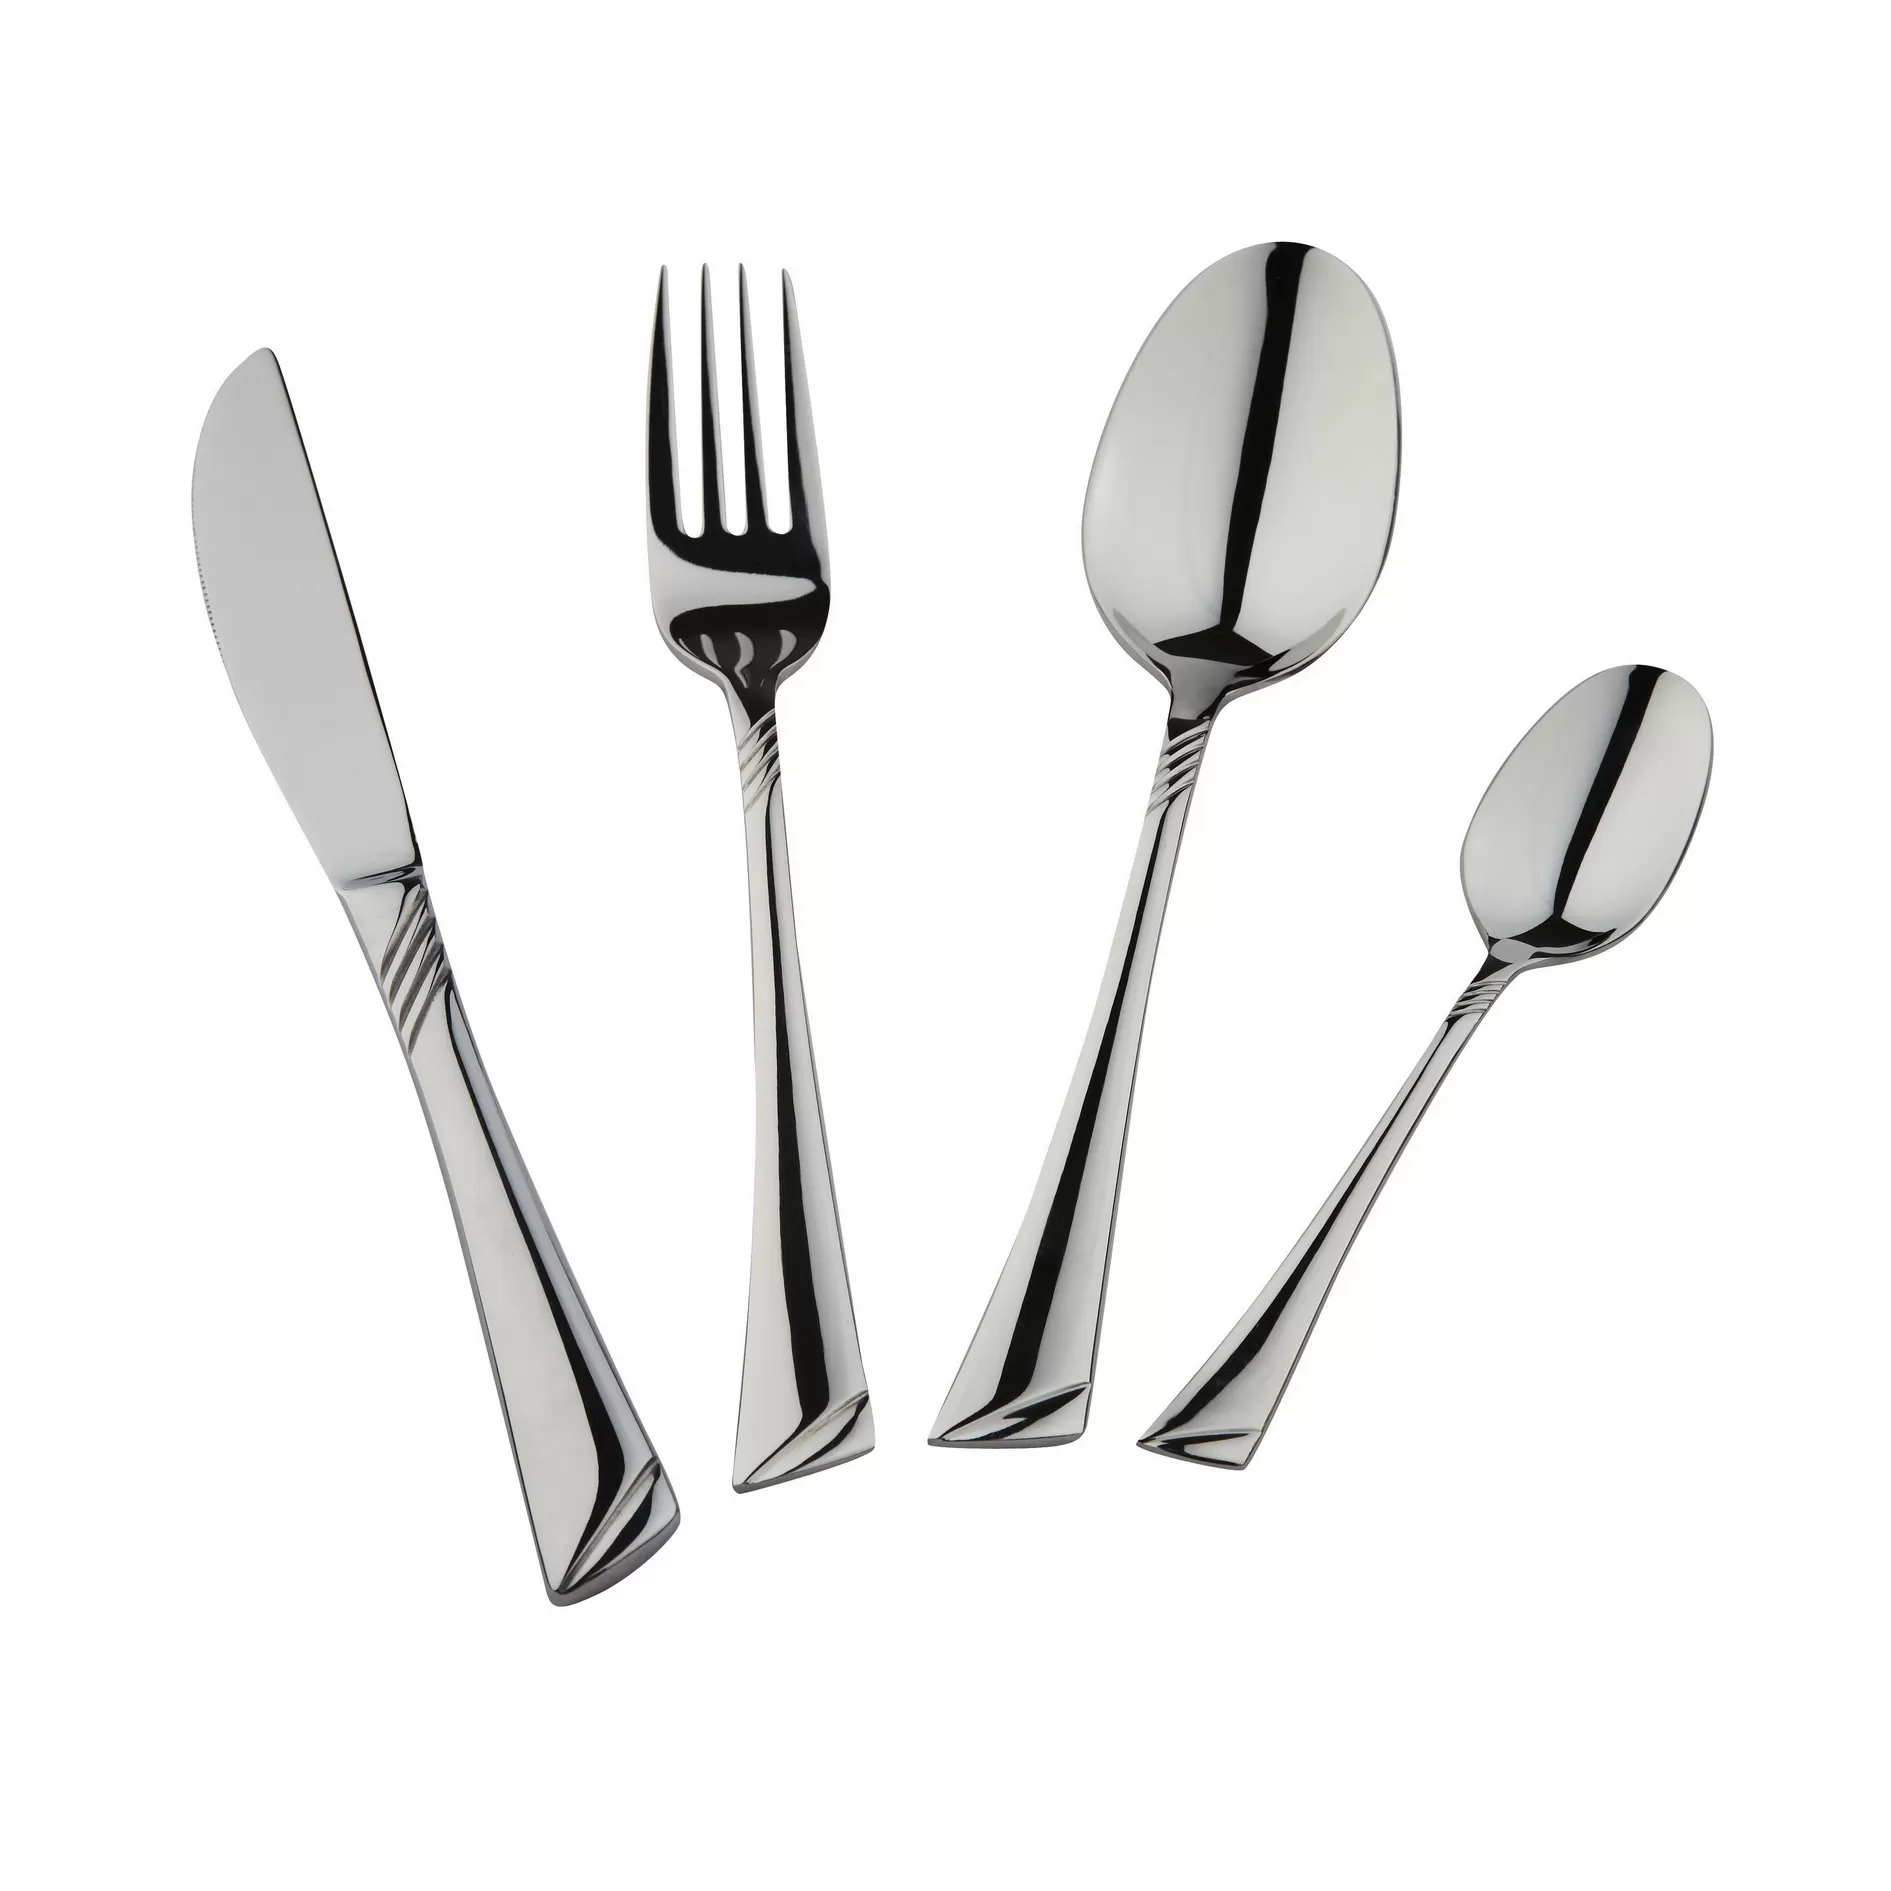 SA-5112 Stainless steel cutlery set